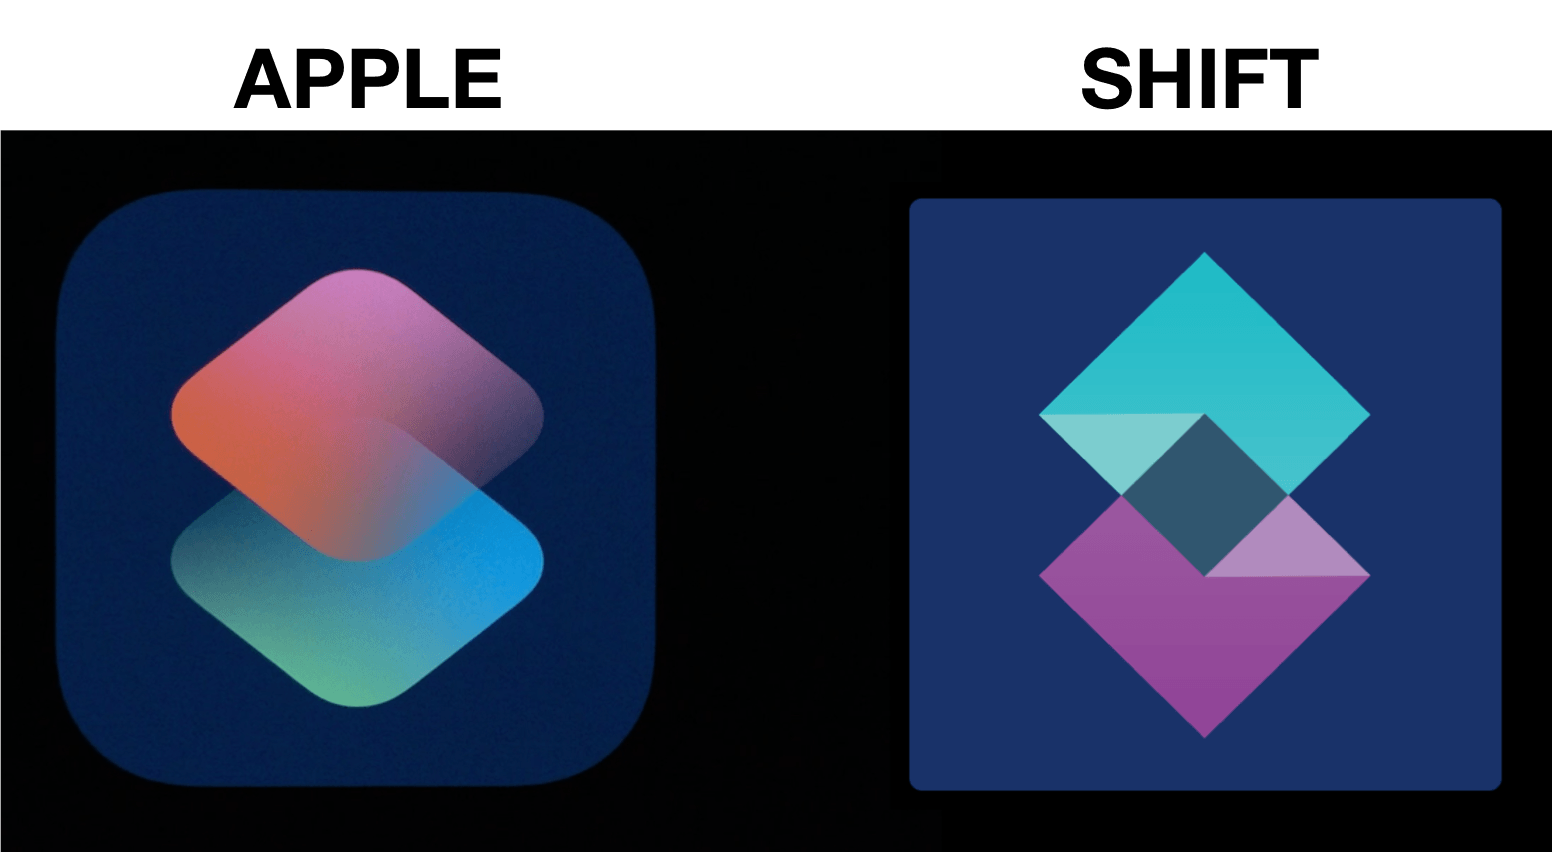 Shift Logo - Apple accused of 'STEALING' logo from start-up that's now demanding ...